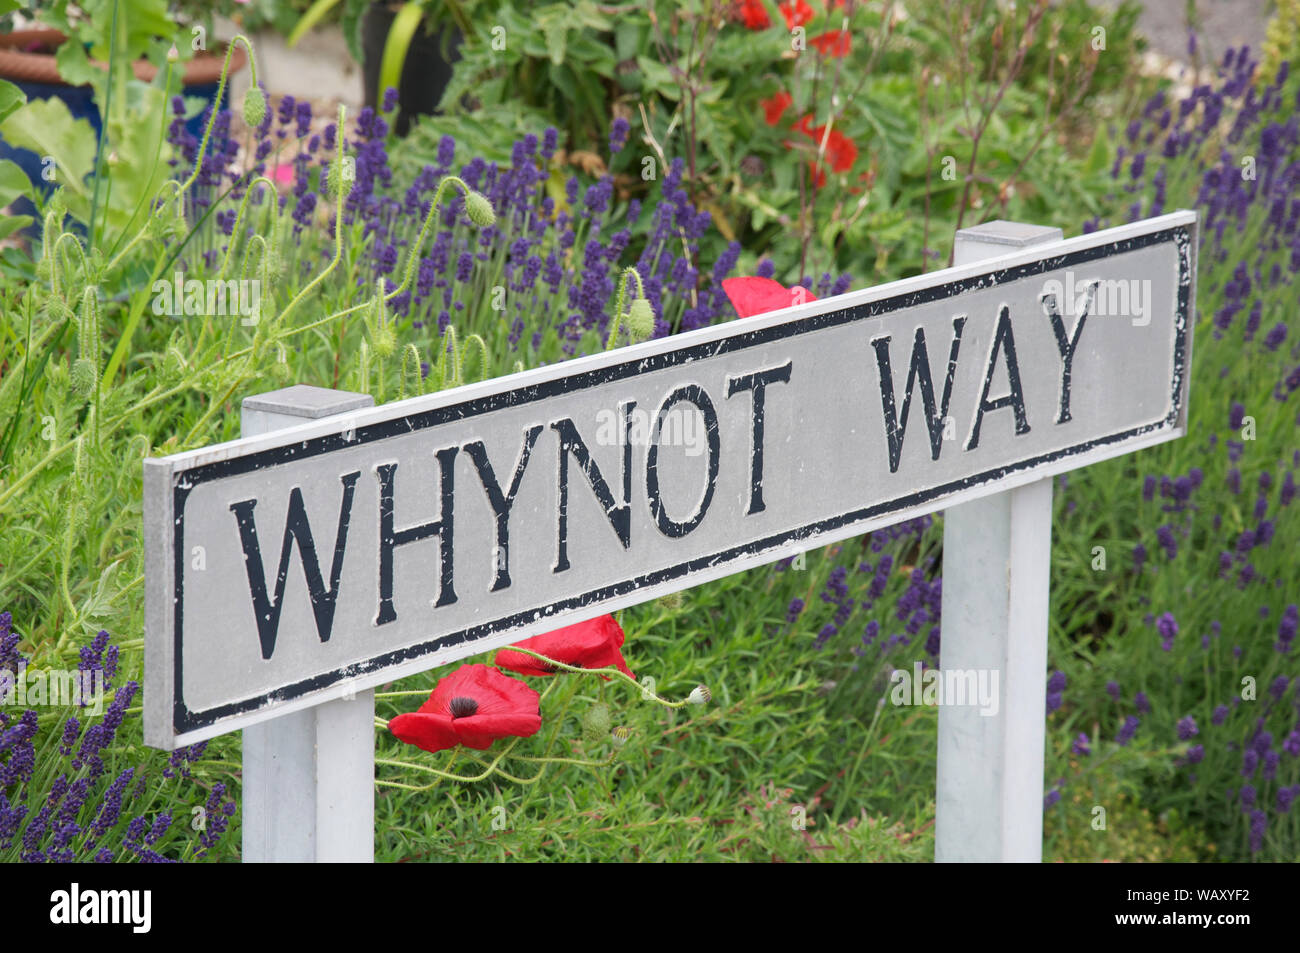 Whynot Way. Quirky, quizzical street name sign in a residential suburban side street. Weymouth, Dorset, England, United Kingdom. Why? Why not? Stock Photo